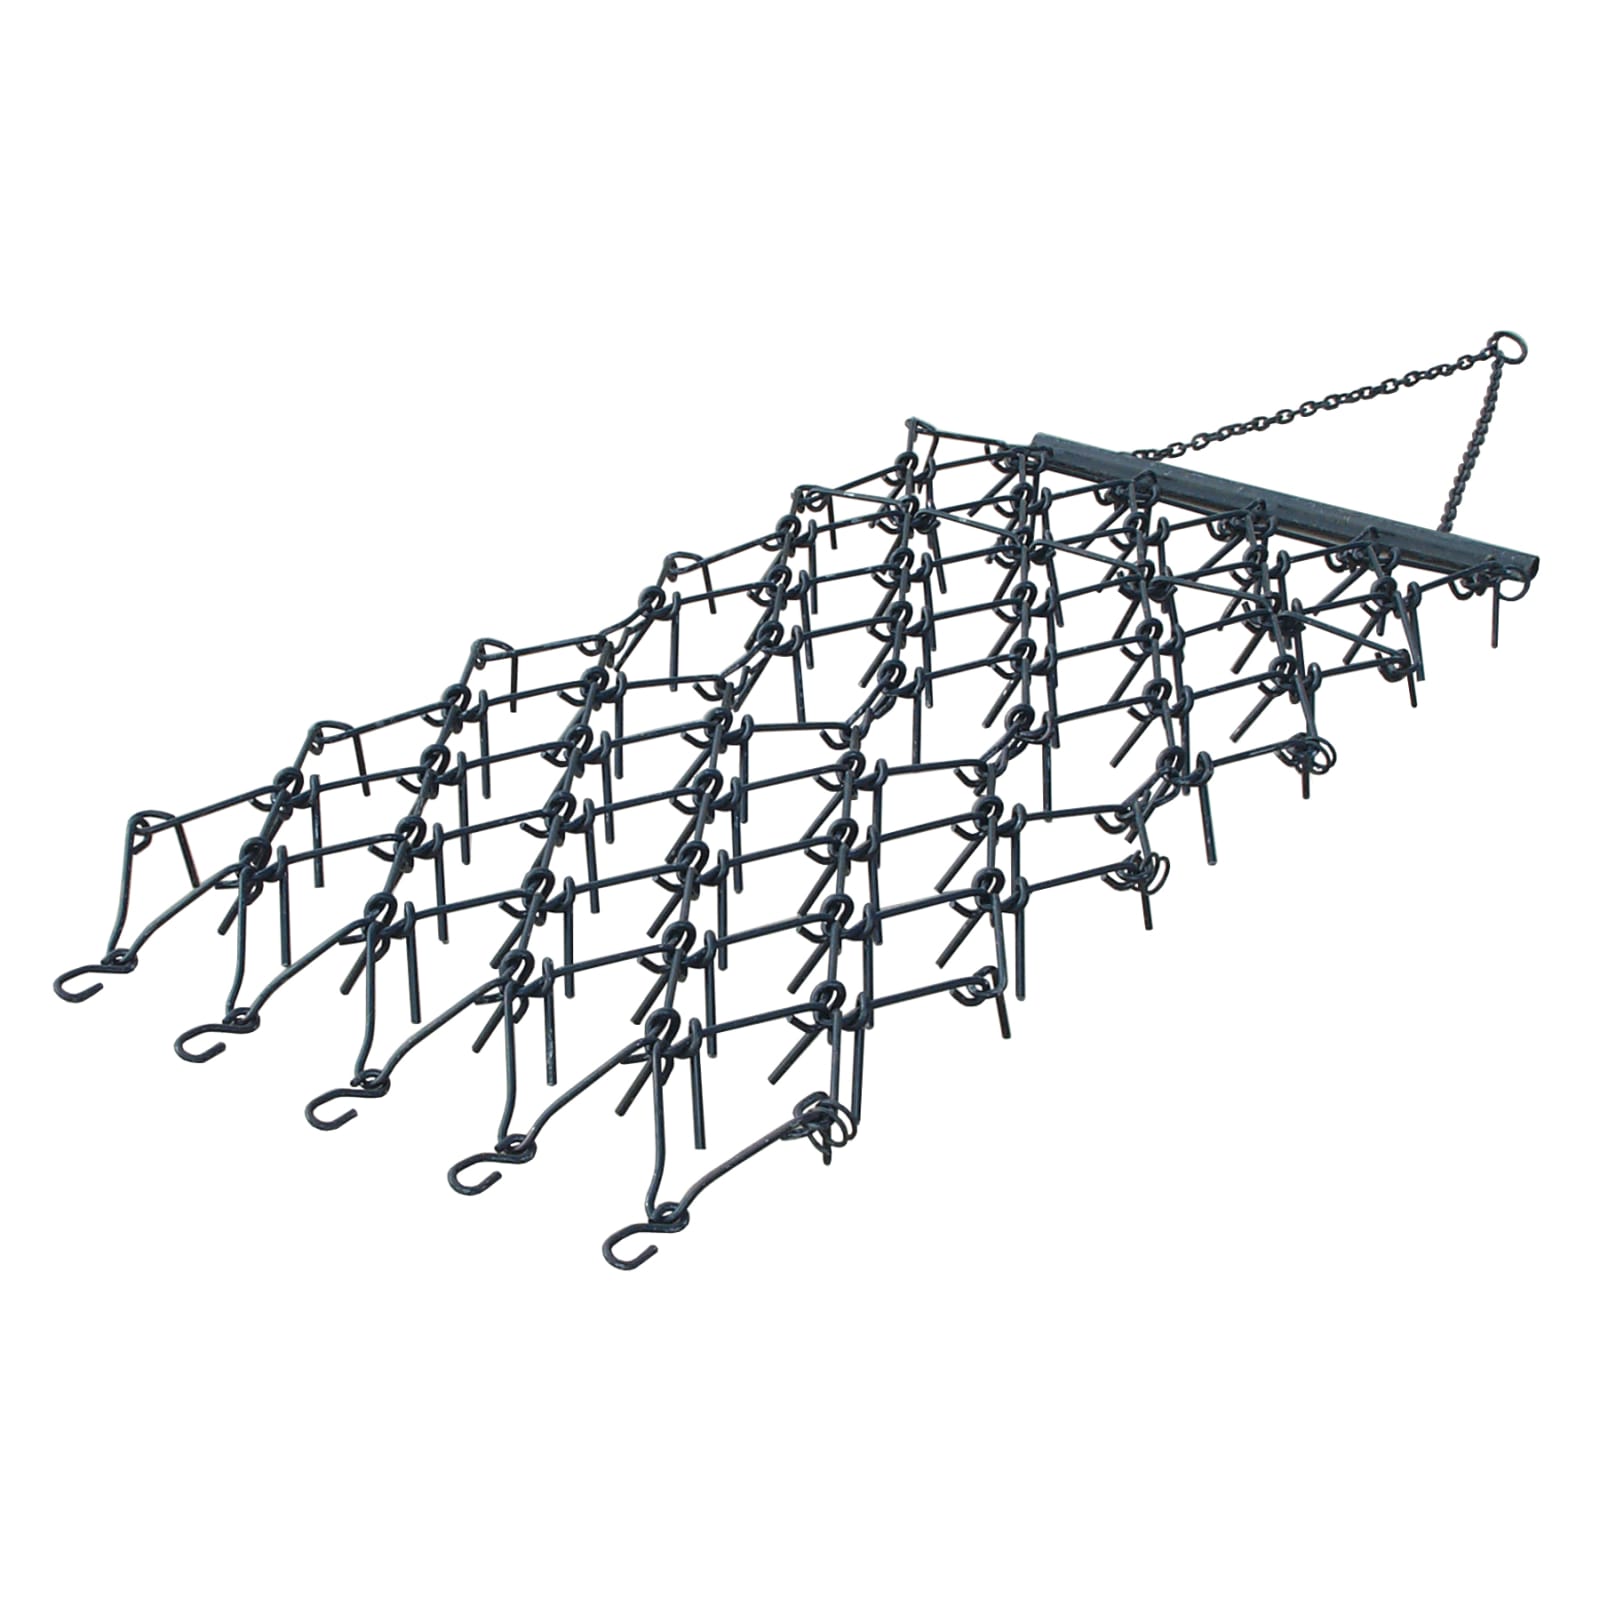 Vertical view of various metal fishing traps and scattered ropes